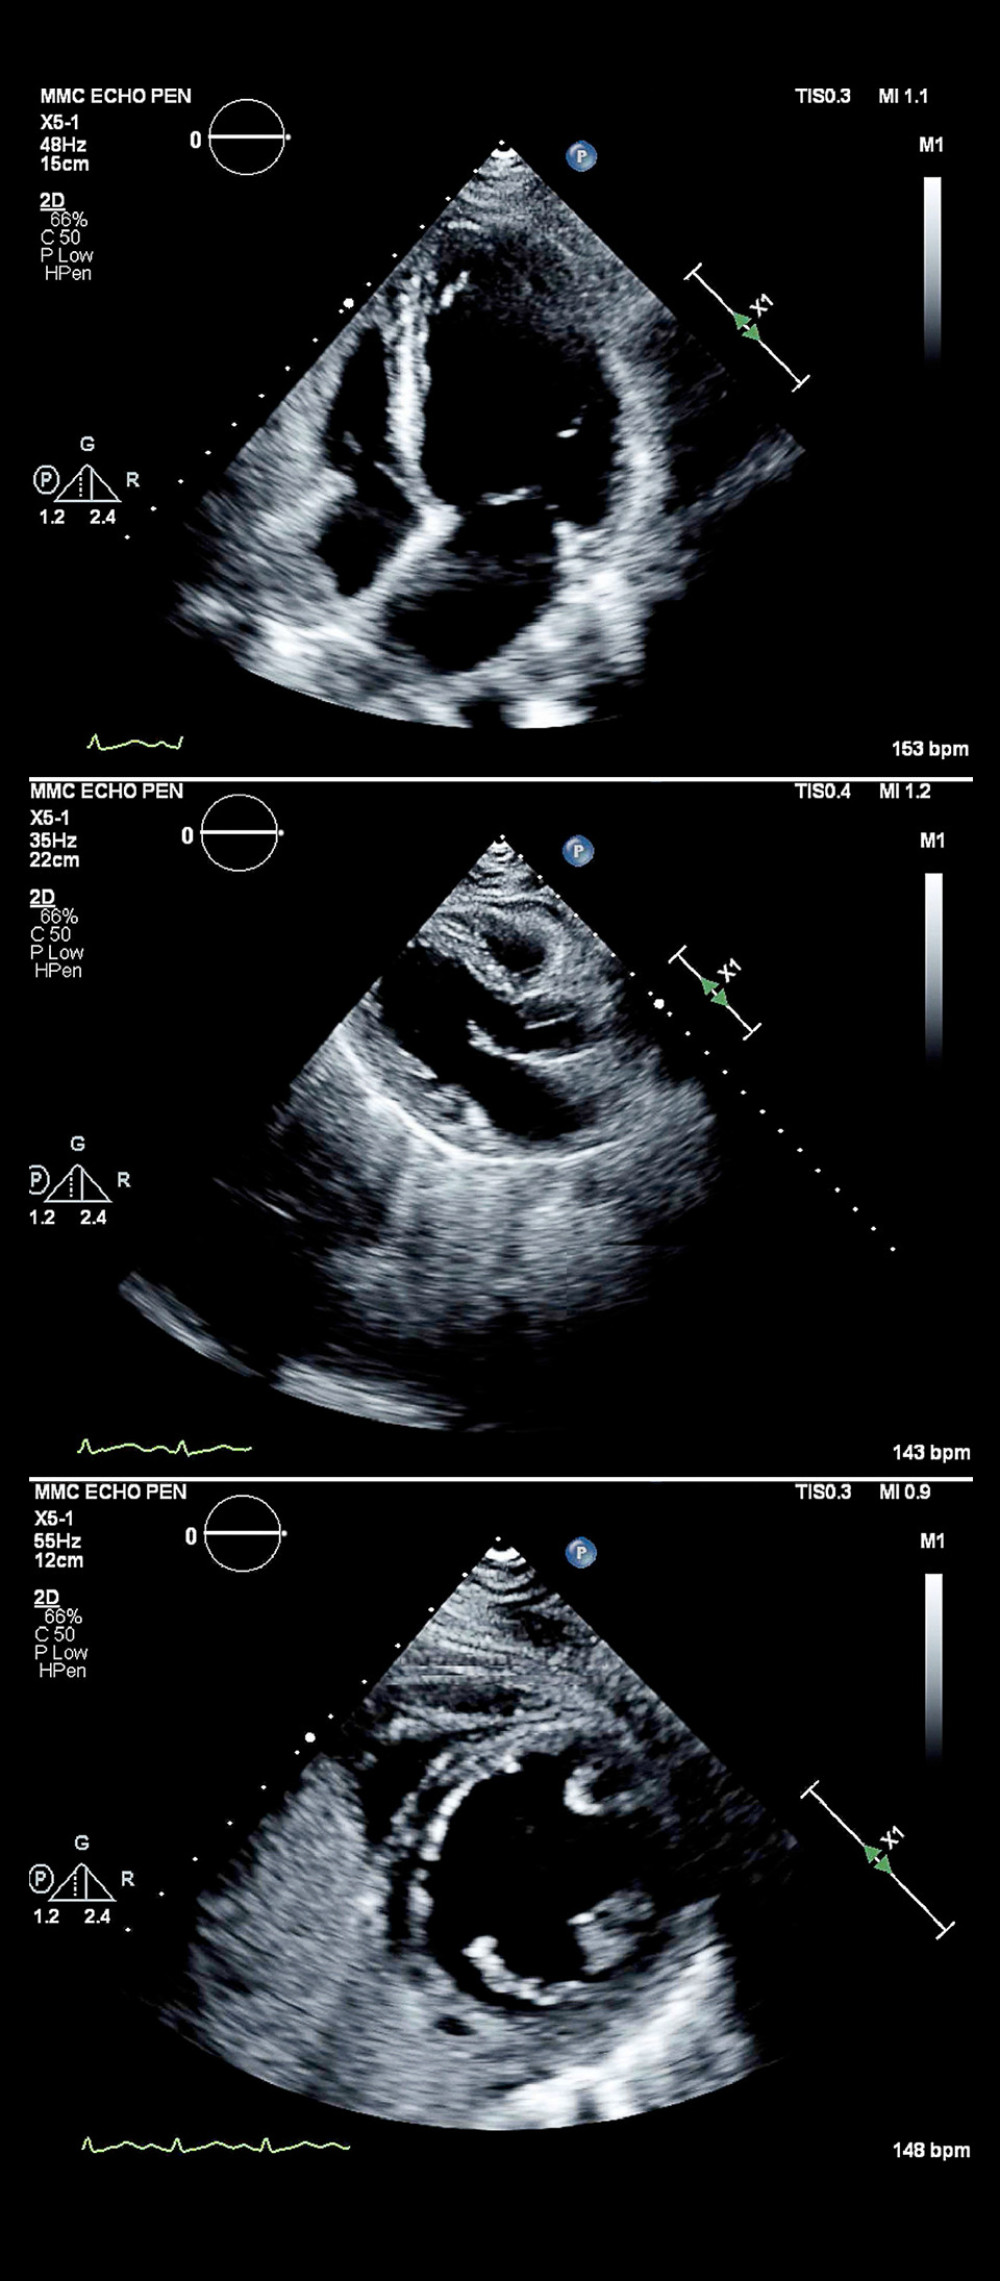 Representative images from the transthoracic echocardiogram on hospital day 2, which showed a dilated left ventricle with a reduced ejection fraction. Top to bottom: apical 4 view, parasternal long axis view, and parasternal short axis view.